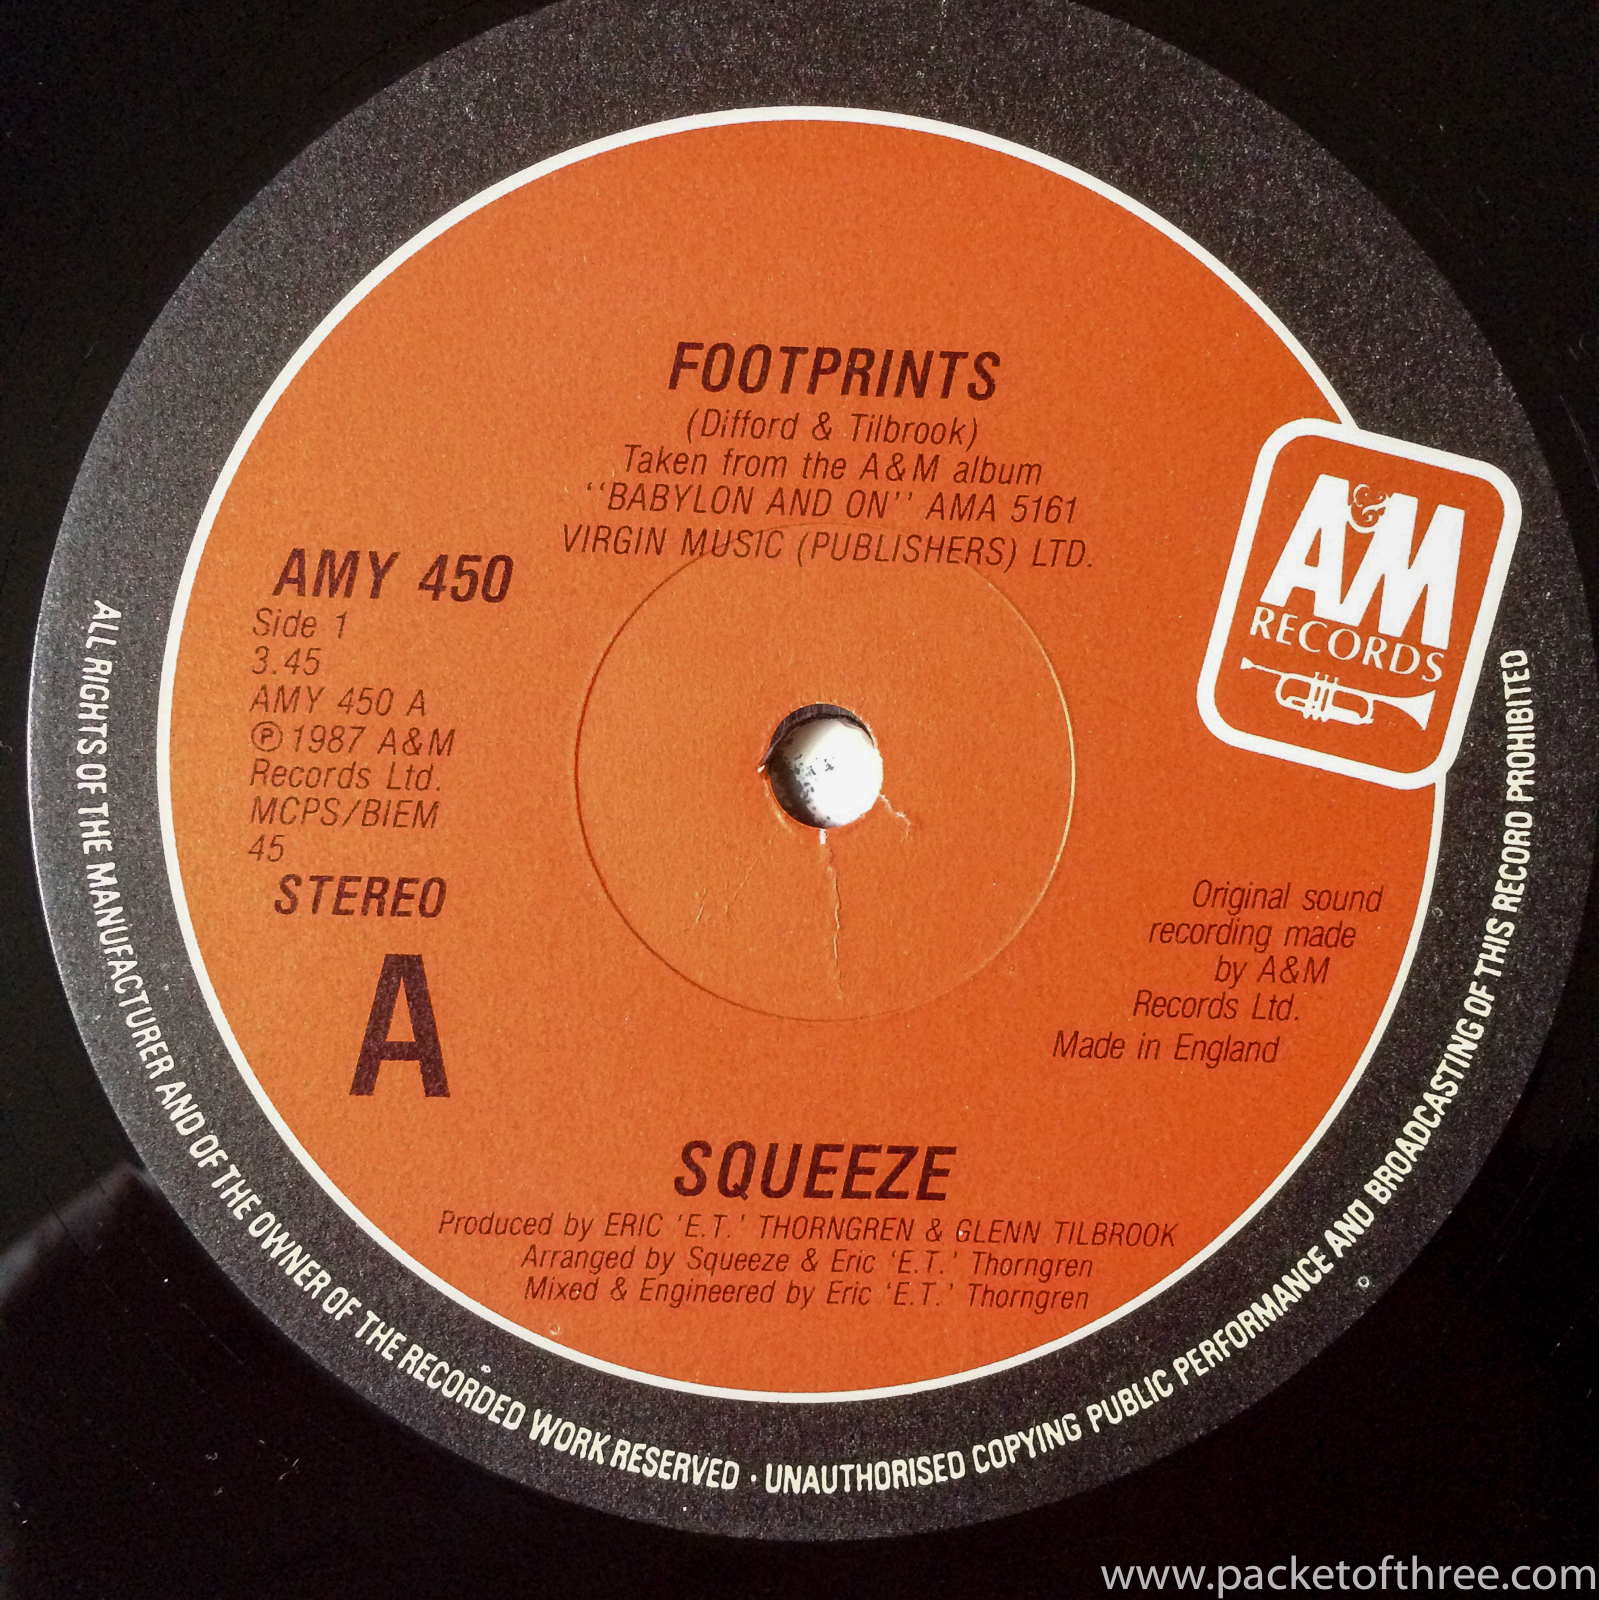 Squeeze - Footprints - UK - 12" - picture sleeve